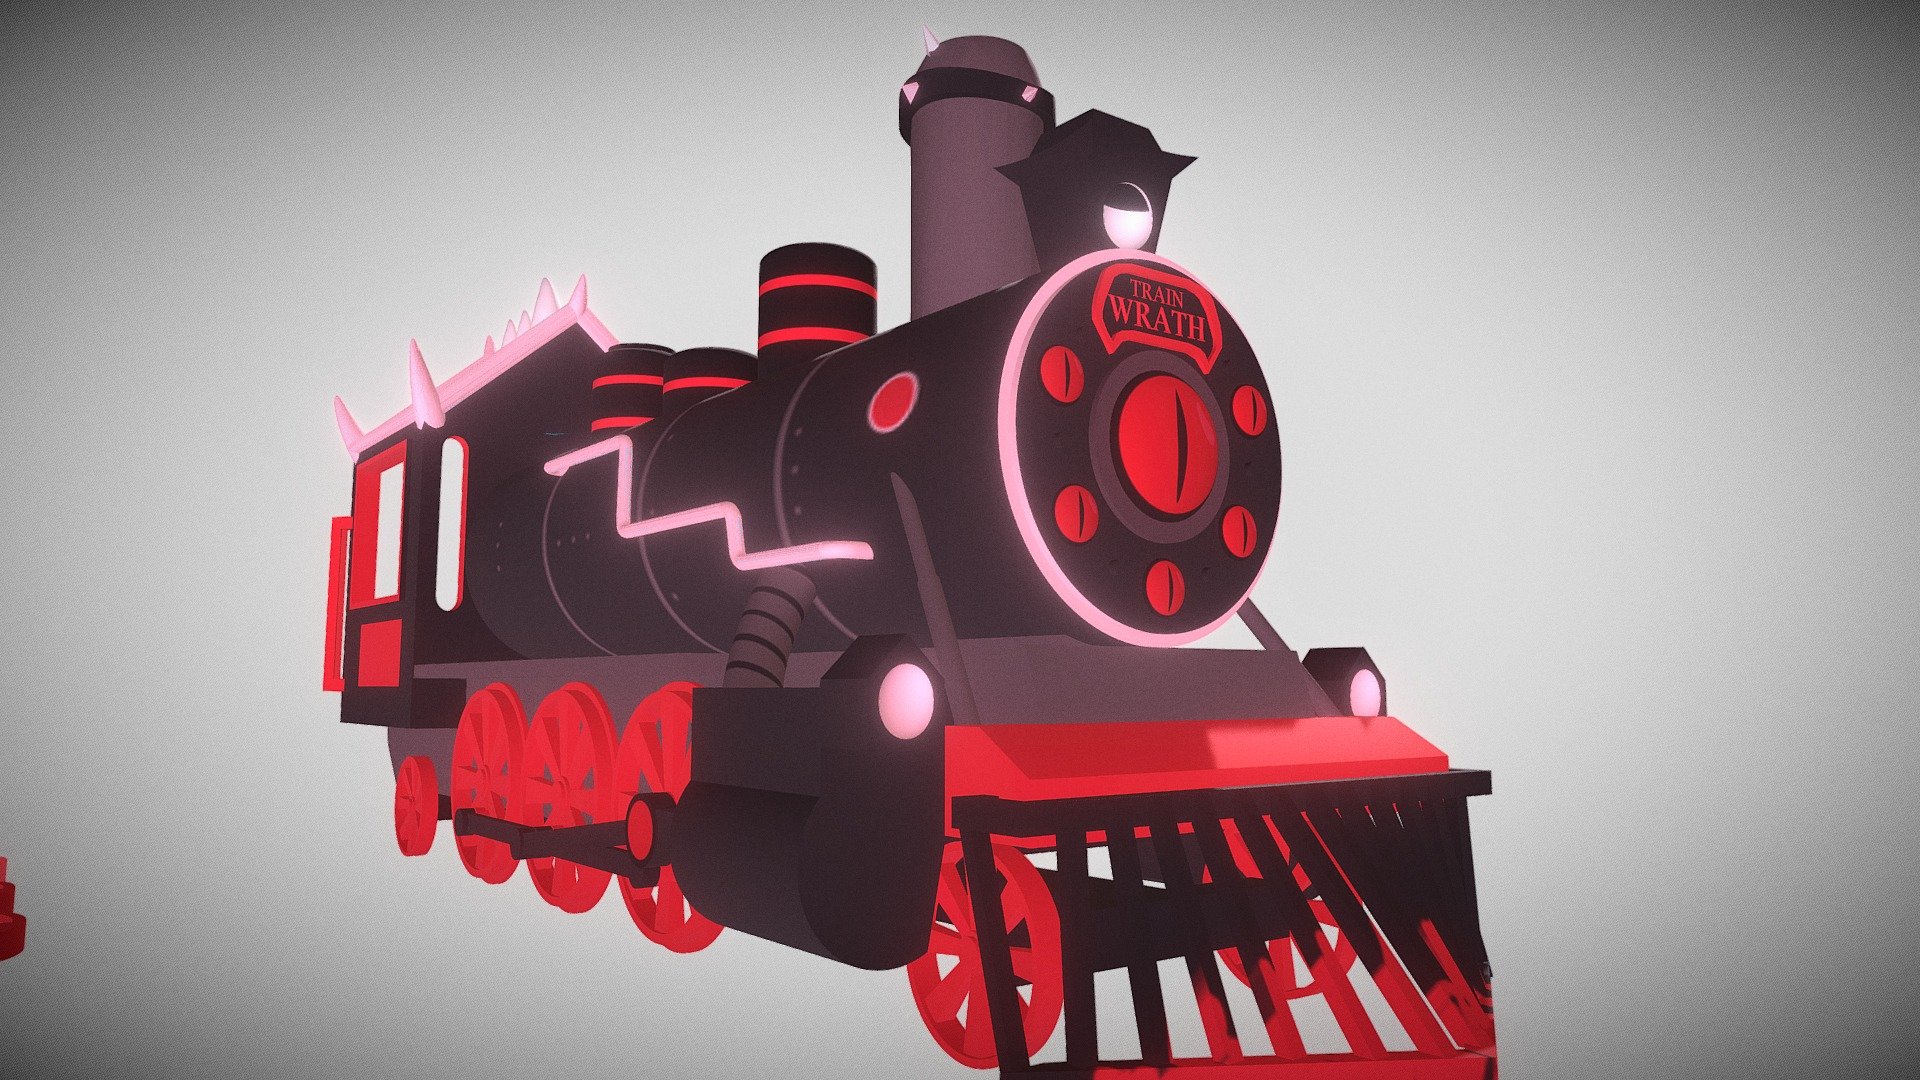 tender coming someday?! will make downloadable from free now!

HE IS STRIKER!
he is very good at causing painnn 
and he loves to ride on a choo-choo&hellip;

..TRAIN! - WRATH EXPRESS Hell Steam Train From Helluva Boss - 3D model by Dave Miller (@DaveMill) 3d model